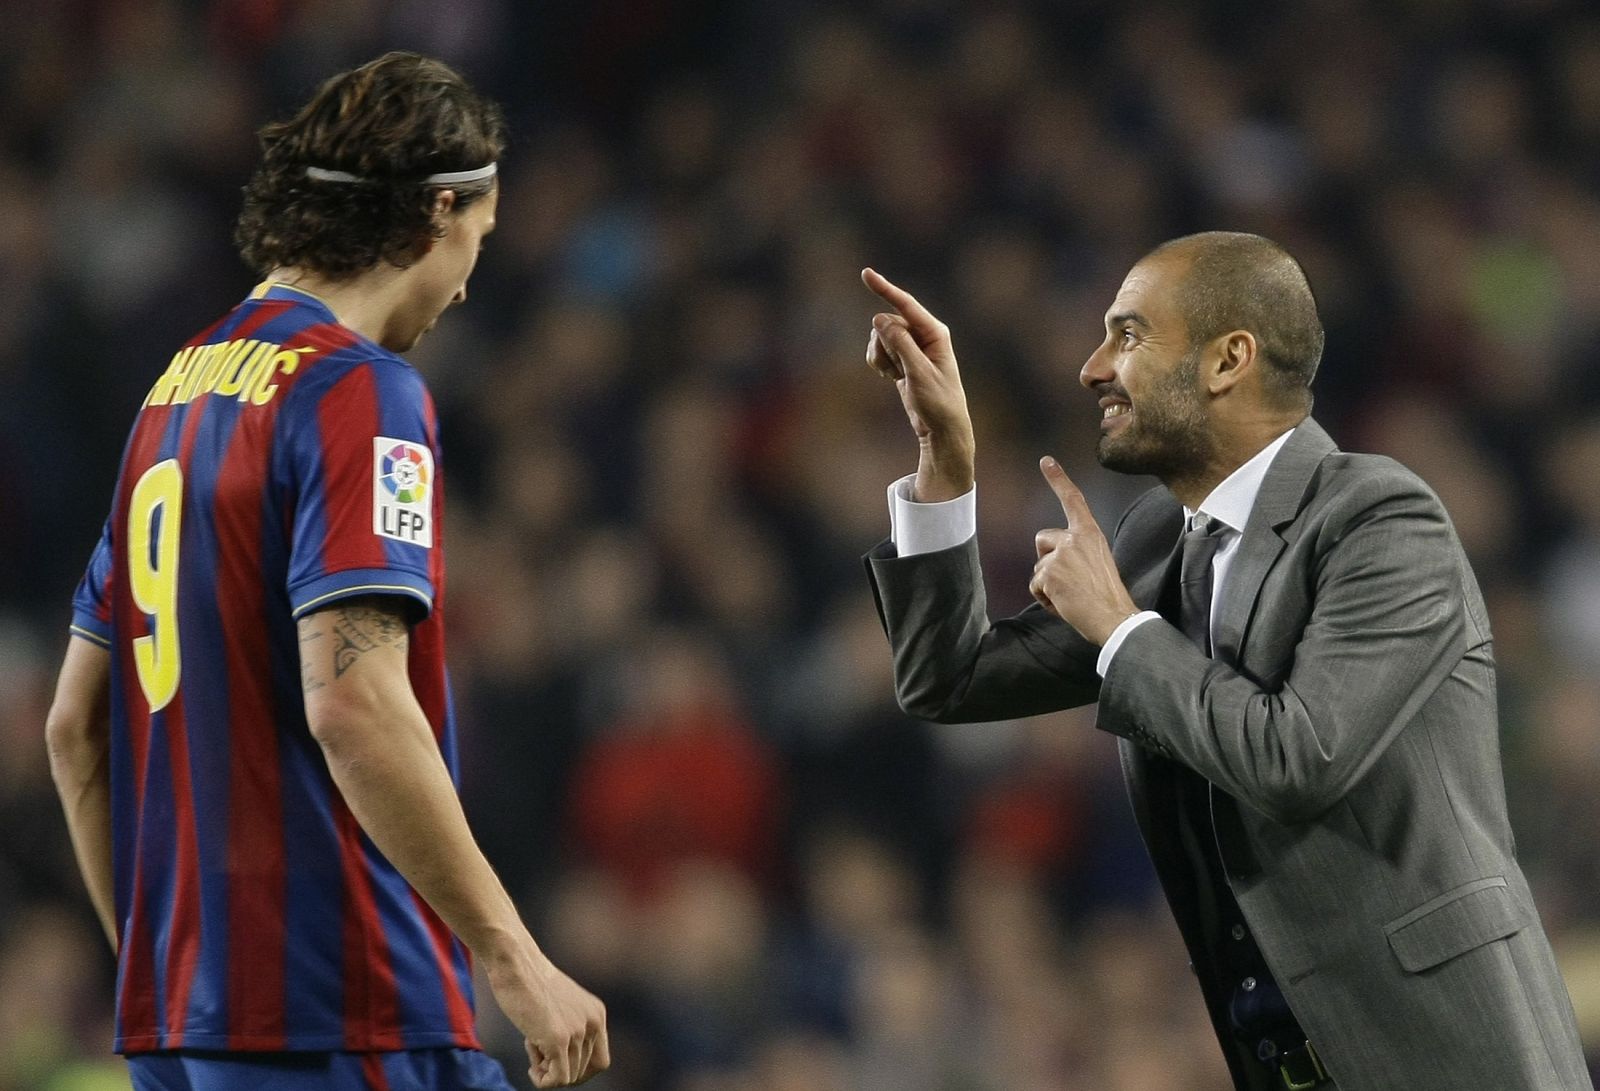 Barcelona's Ibrahimovic listens to coach Guardiola during their Spanish first division soccer match in Barcelona